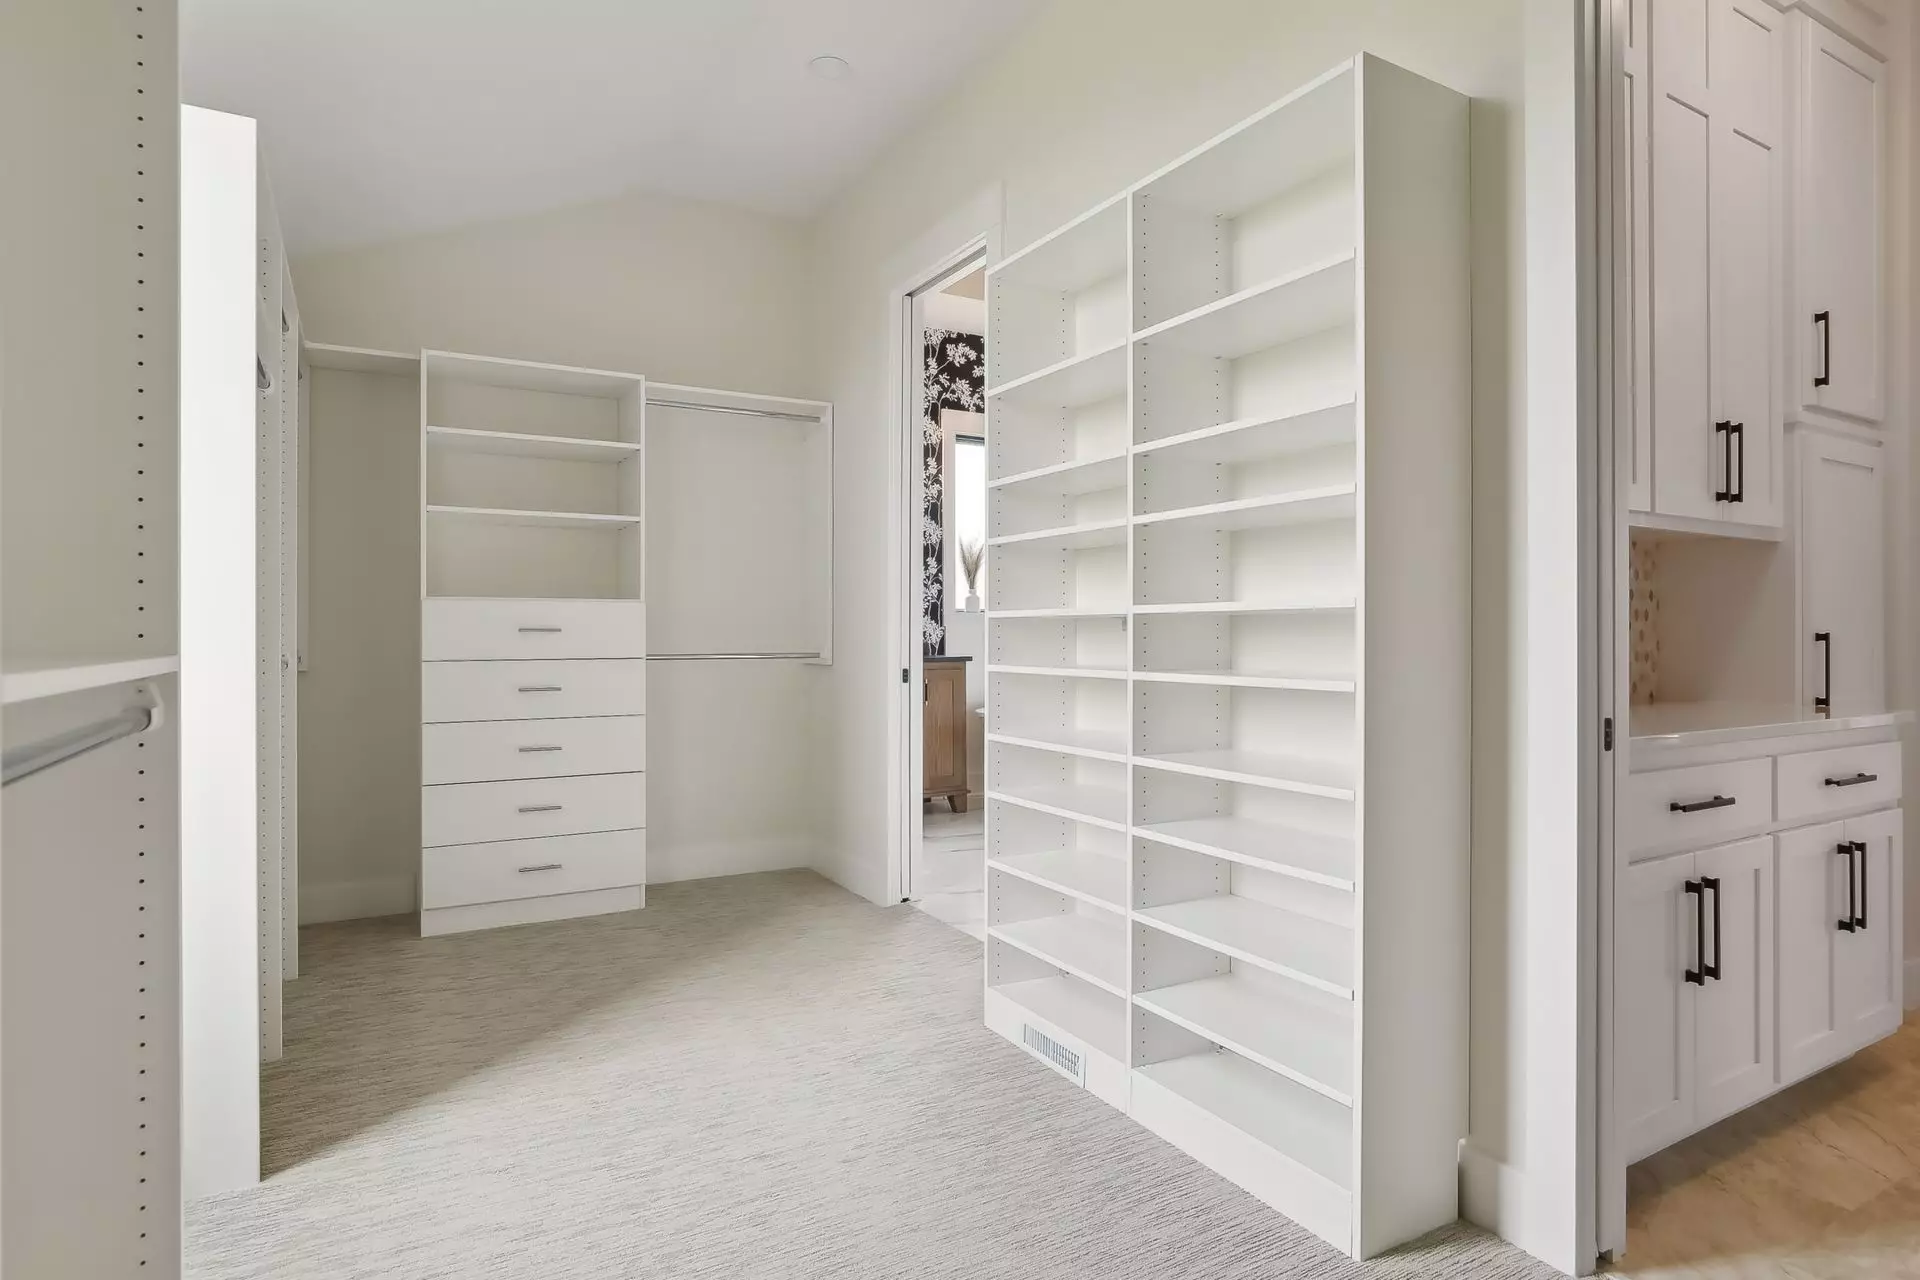 Primary suite walk-in closet with organizers and access to laundry room